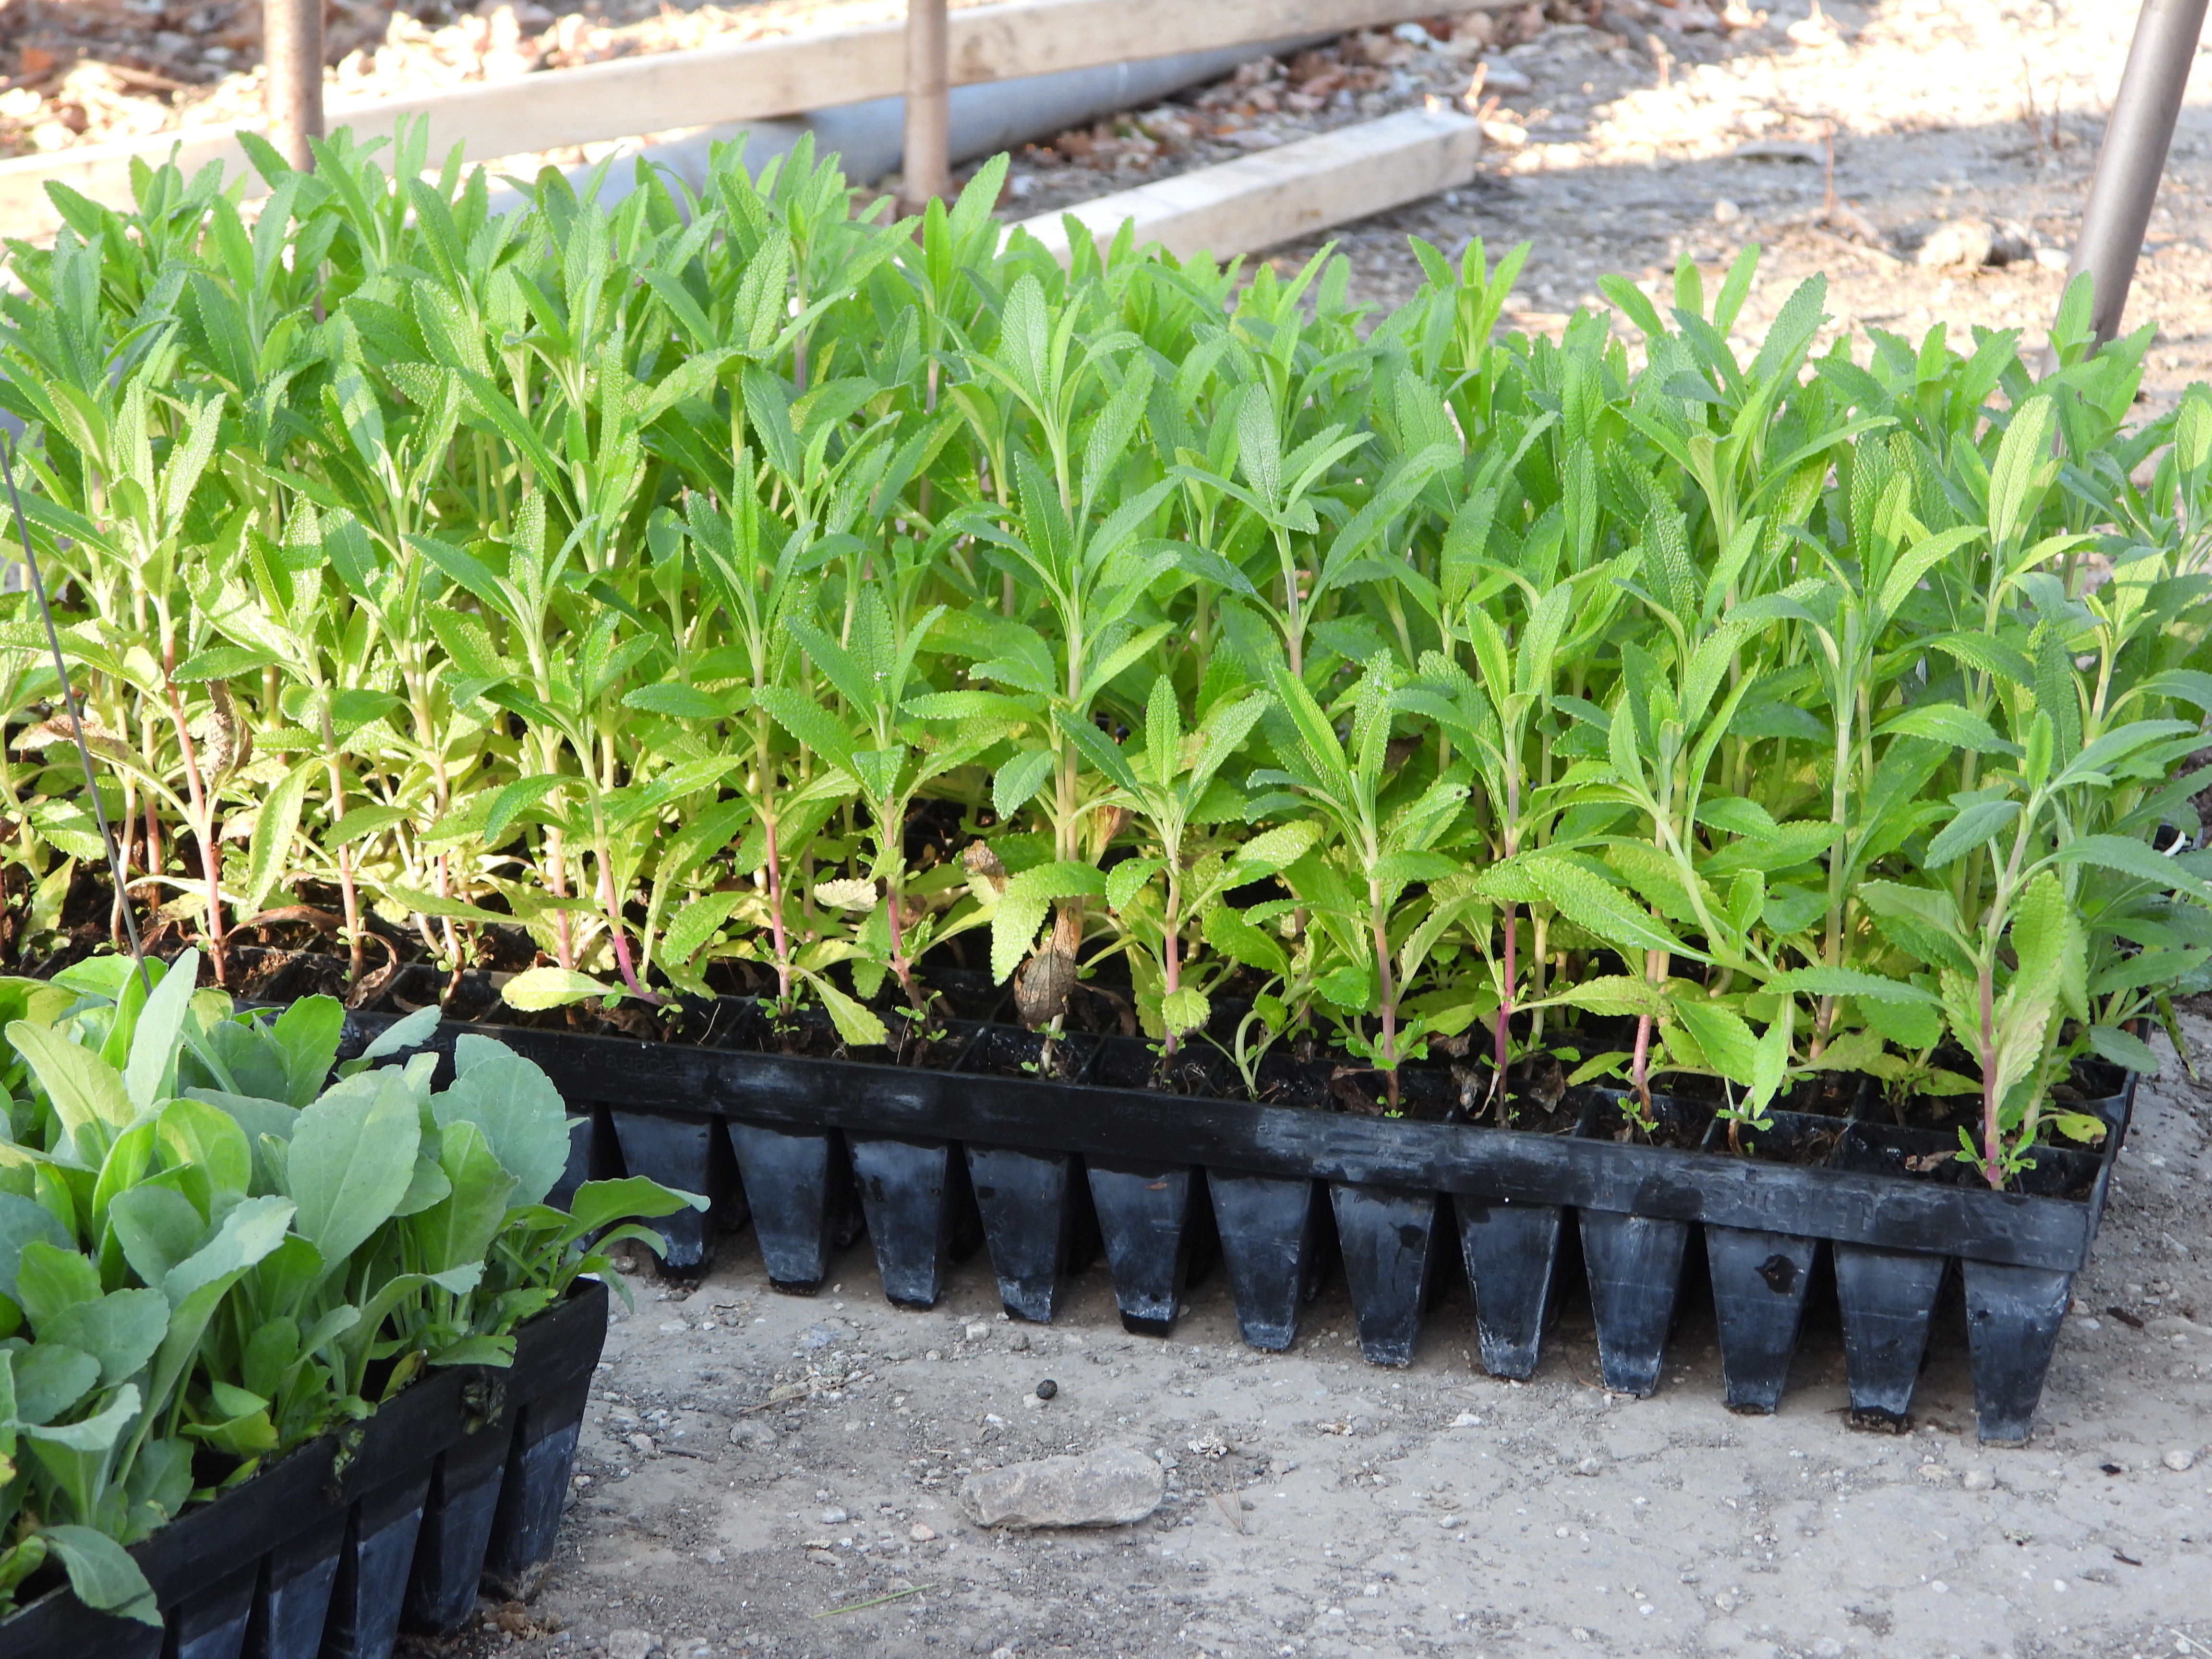 Many small, green plants of the same height and general shape are clustered together in trays.